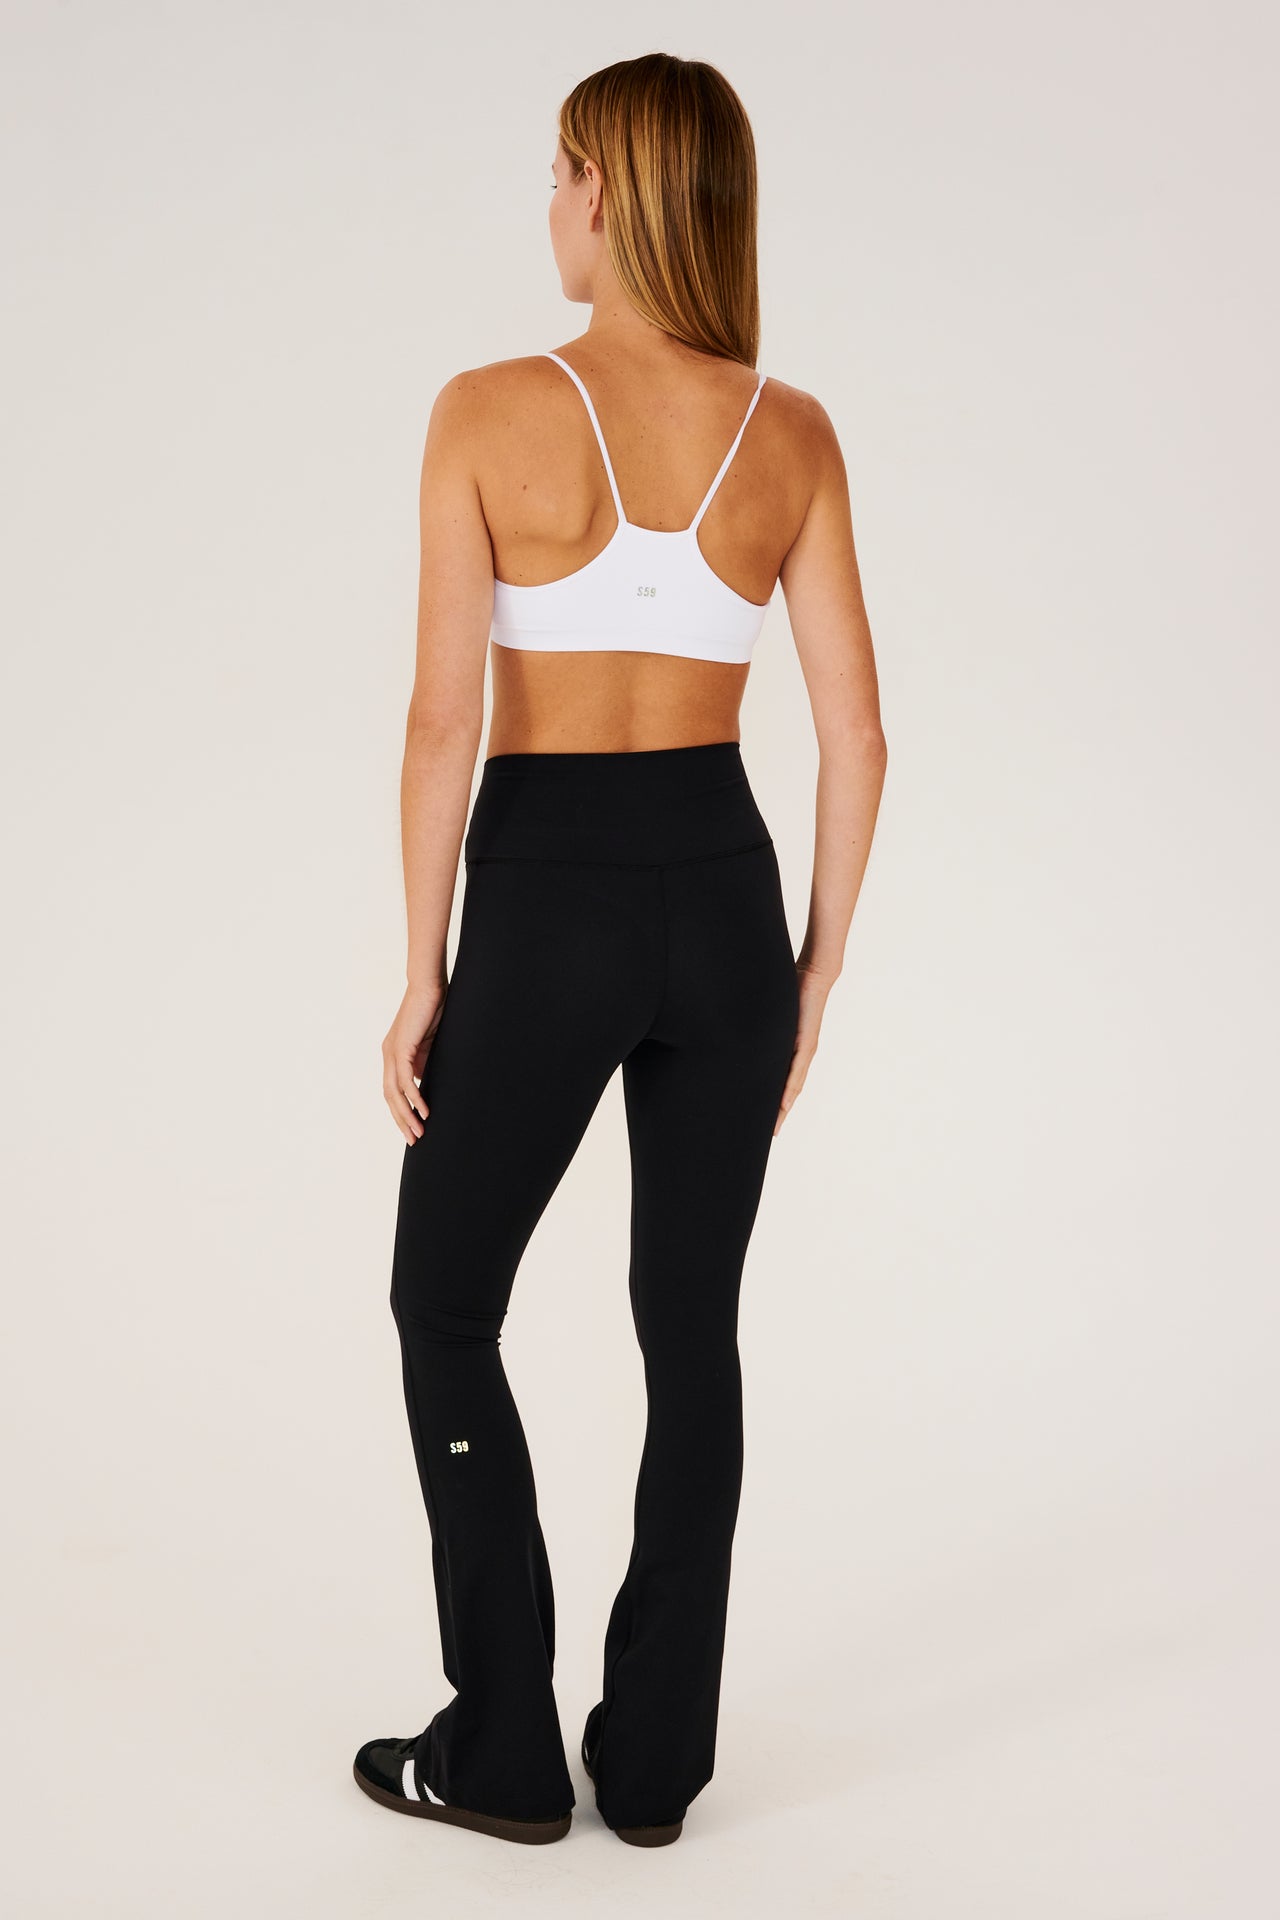 Full back view of woman with straight blonde hair wearing a black high waist below ankle length legging with wide flared bottoms with gray S59 logo on back of left calf and white racerback bra with spaghetti straps. Paired with black shoes with white stripes.